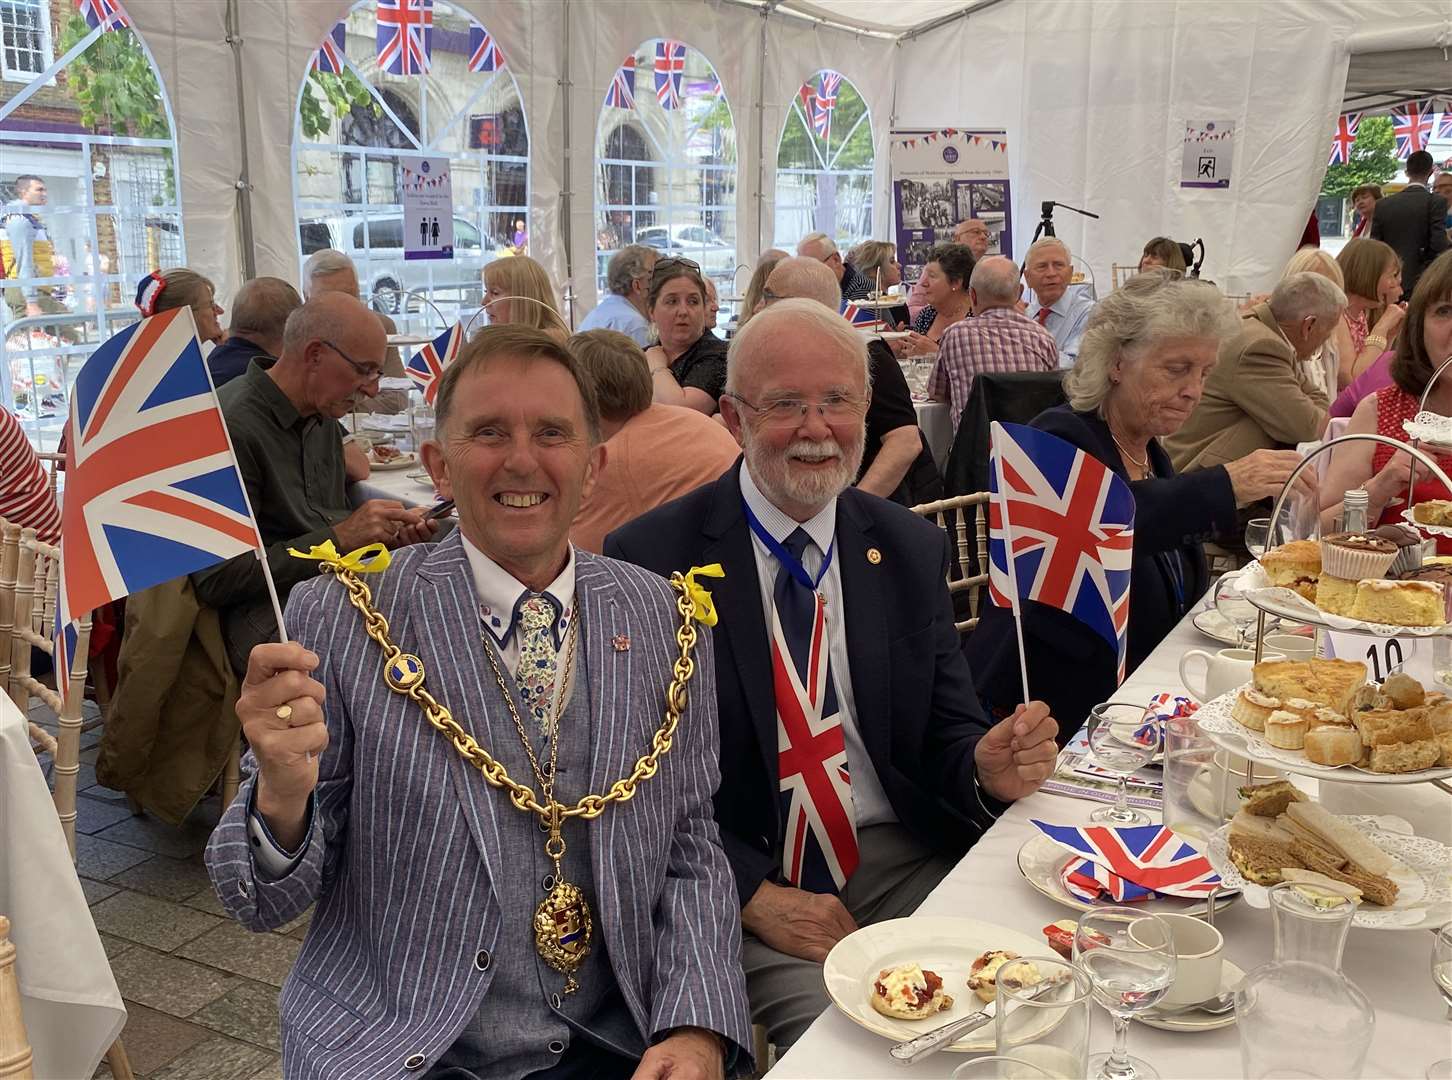 The Mayor of Maidstone, Cllr Derek Mortimer, joined in with the celebrations